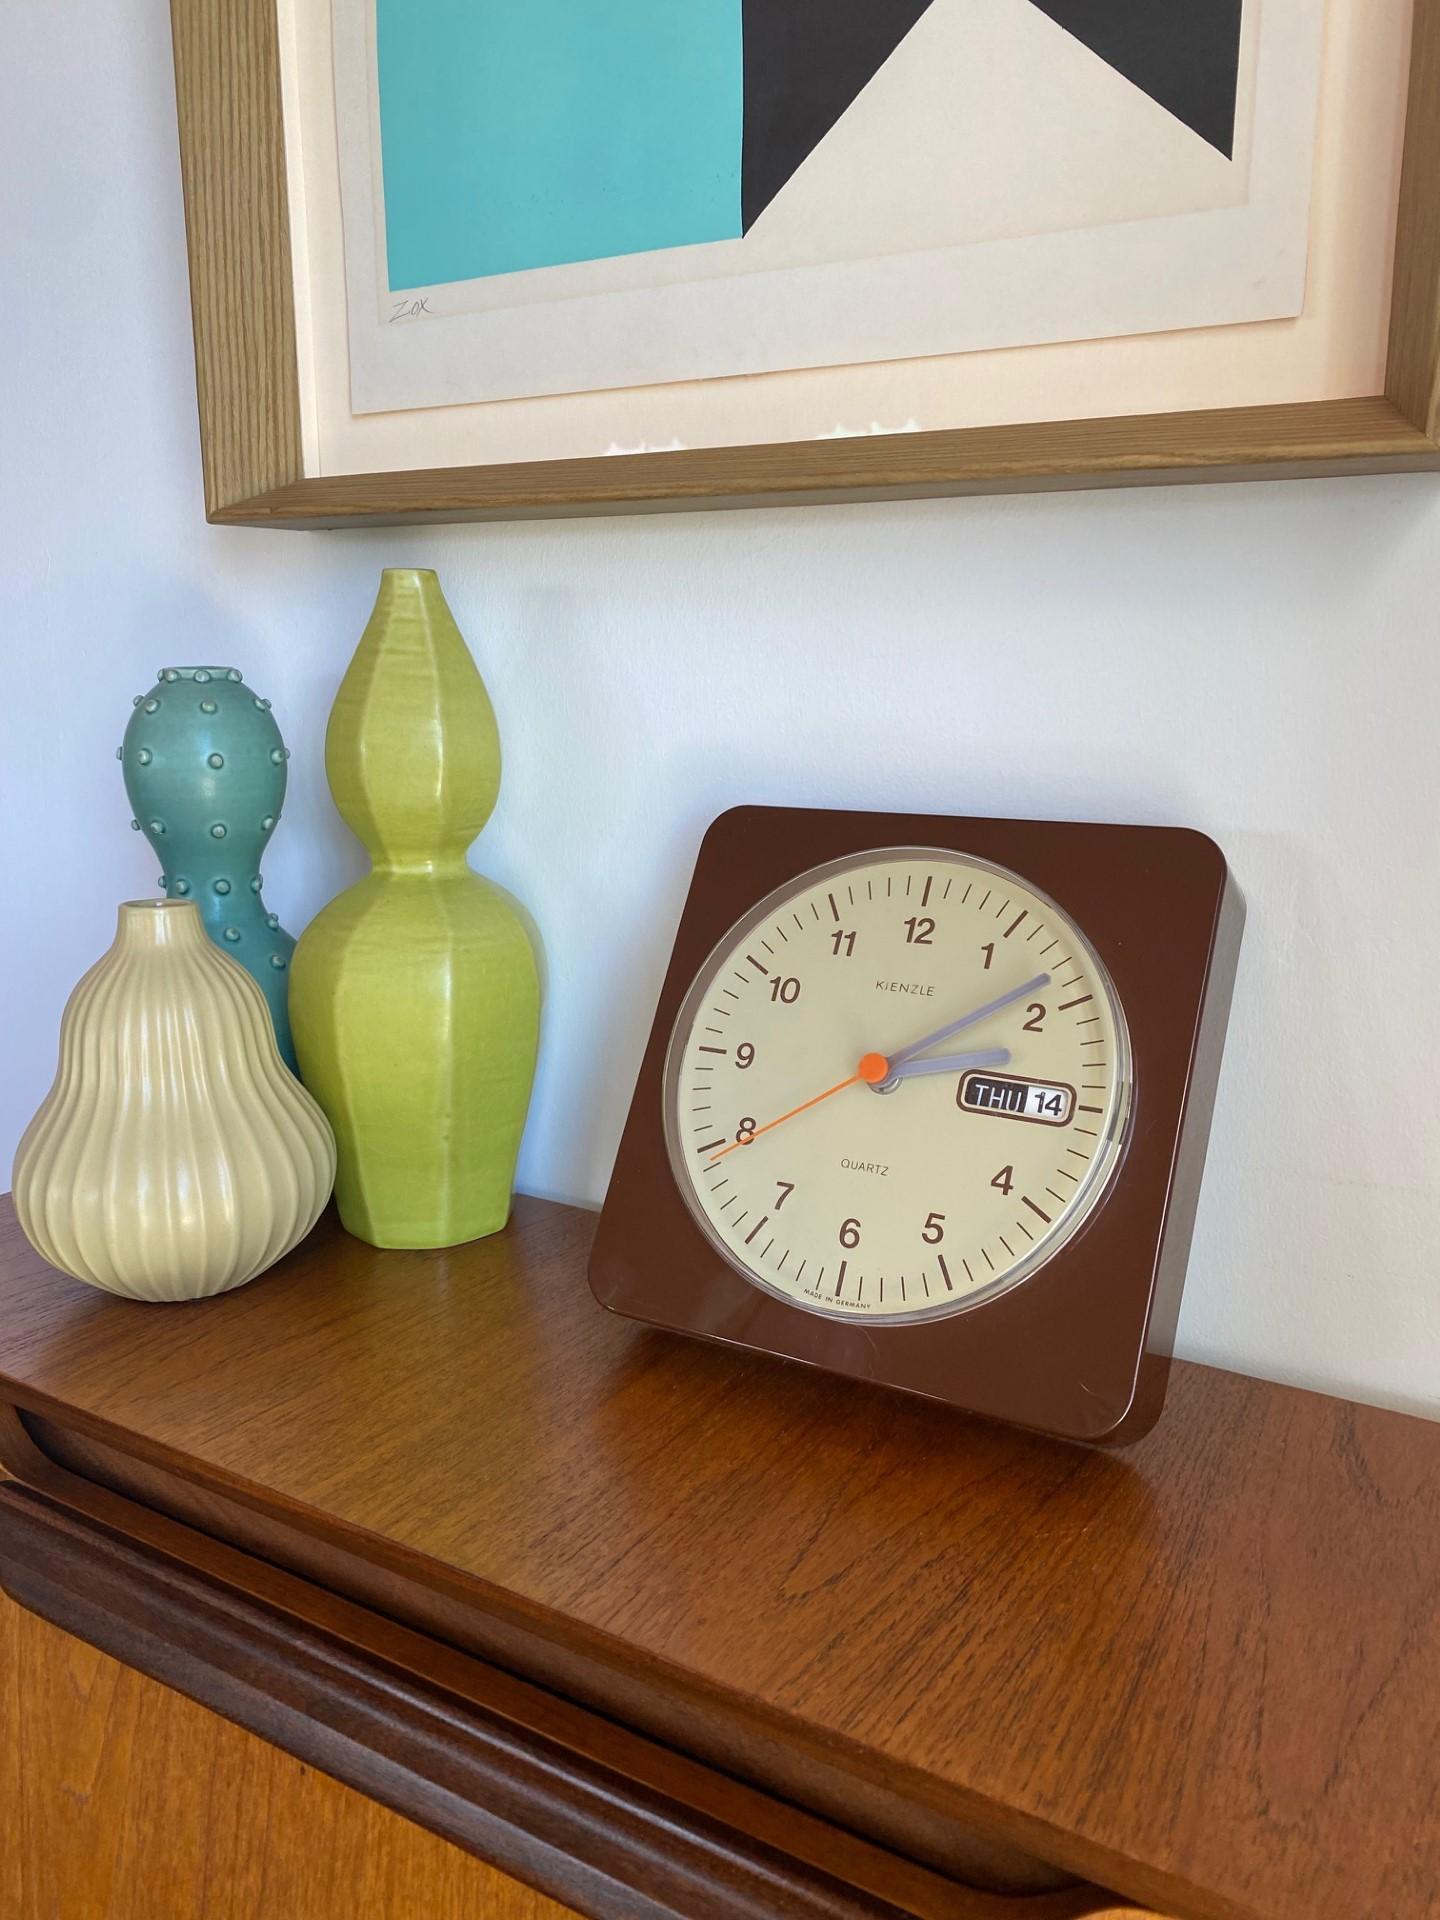 Incredible time piece. Great design on this wall clock by Kienzle, made in Germany circa late 1970's all plastic with calendar.  The piece is streamlined and highlights it’s specific polished style. This timepiece evokes a style that is timeless and